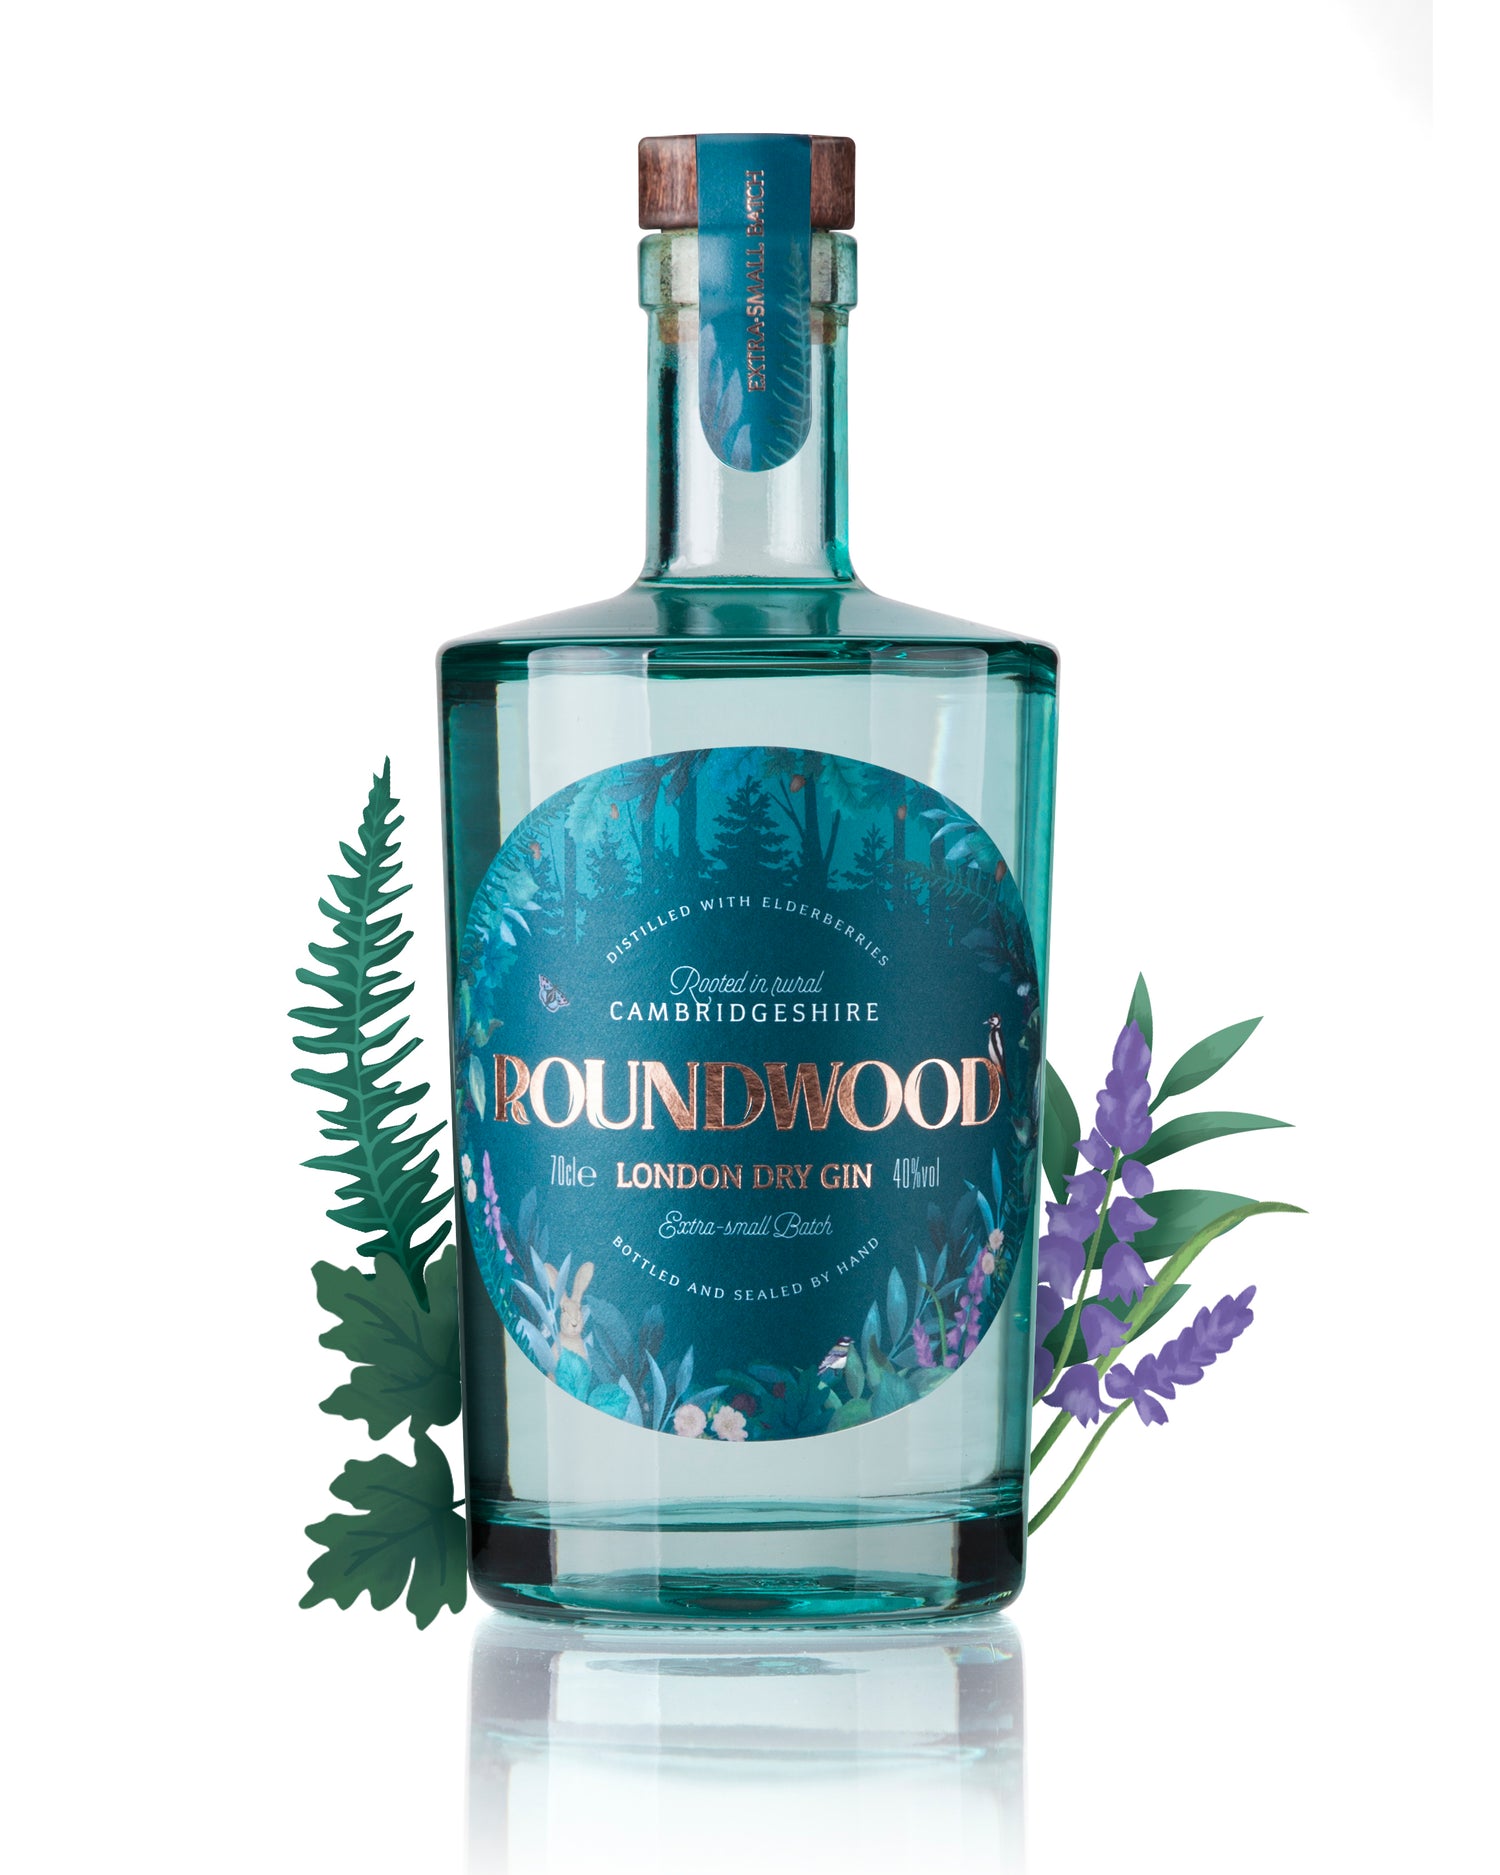 Roundwood Gin striking teal blue bottle, with illustrative botanical woodland label. Label shows copper foiled heading. Bottle displayed with decorative artwork of foxgloves and leaves